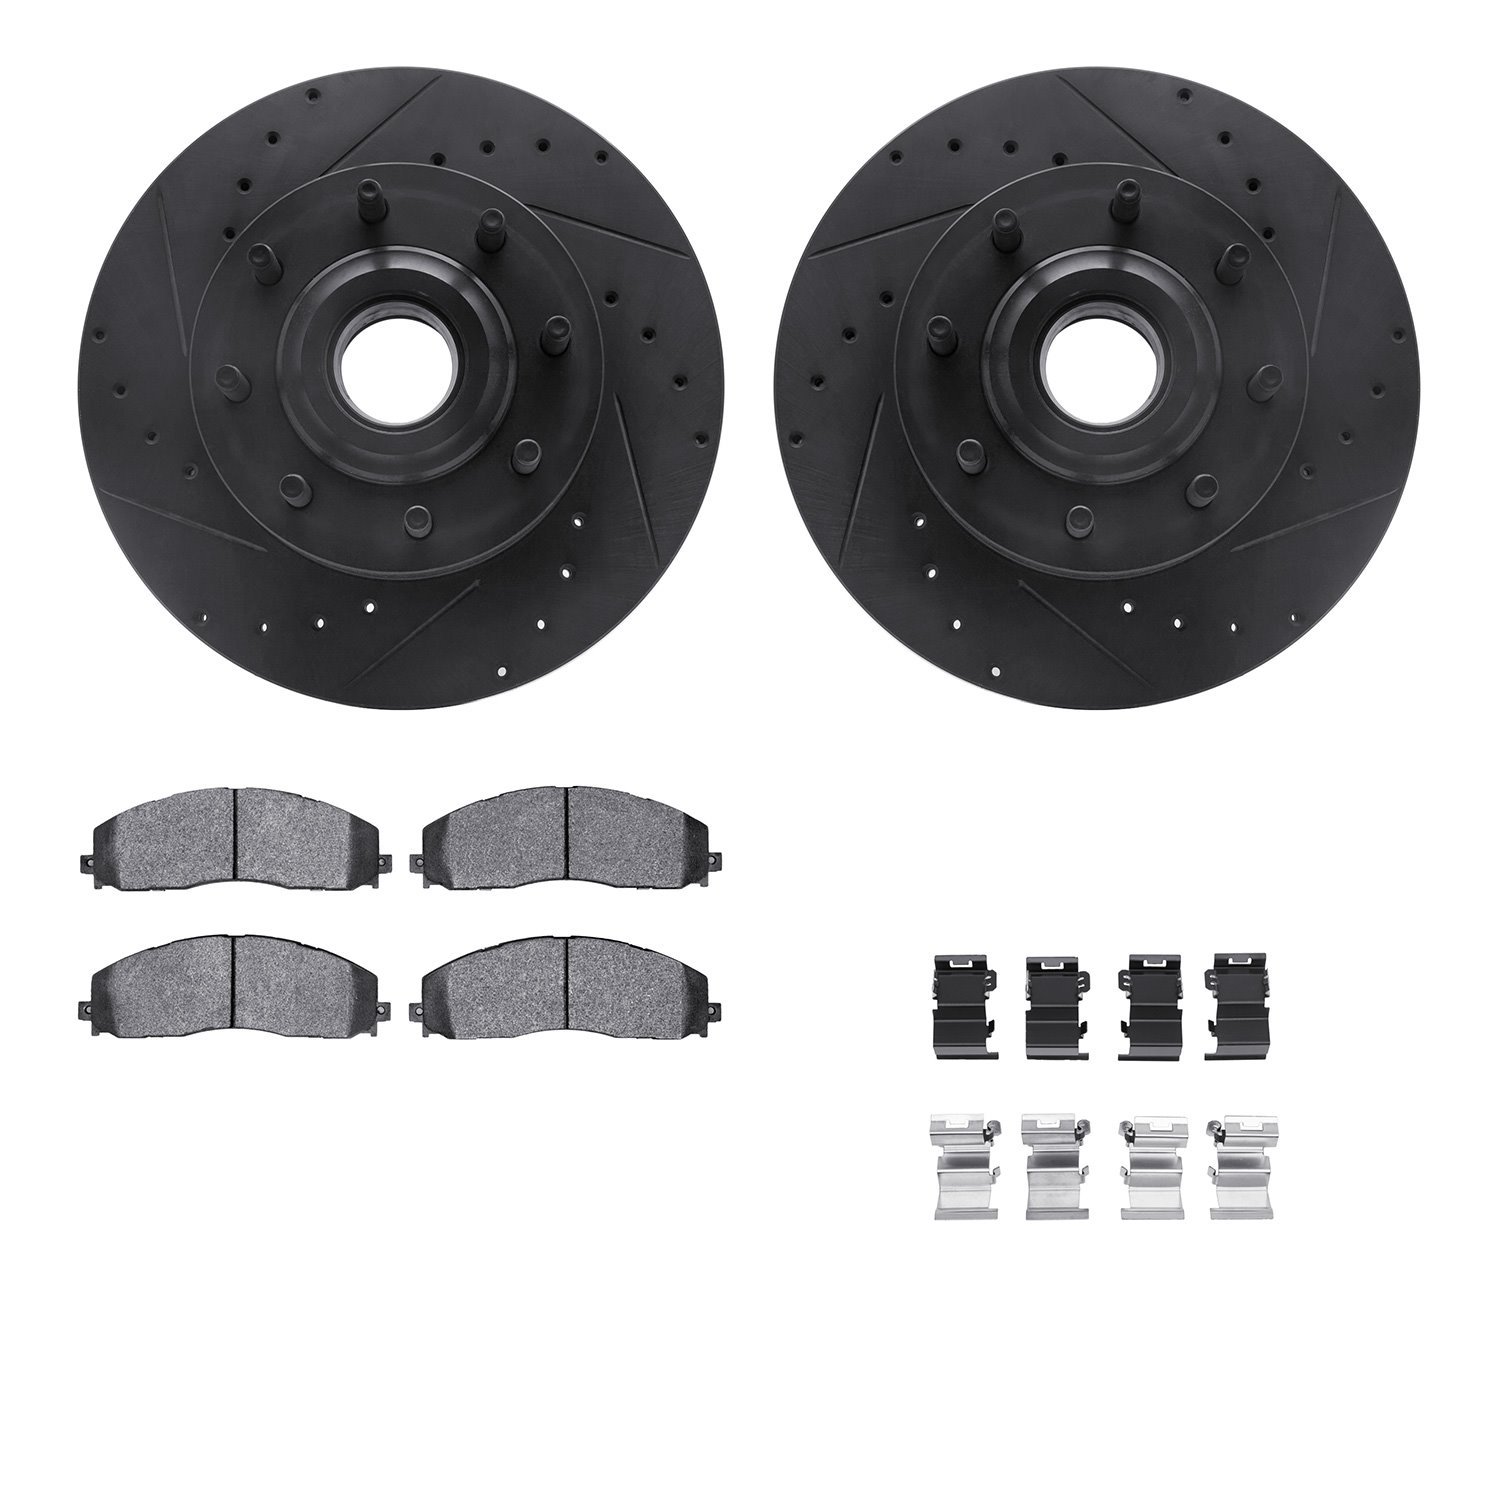 8412-54099 Drilled/Slotted Brake Rotors with Ultimate-Duty Brake Pads Kit & Hardware [Black], Fits Select Ford/Lincoln/Mercury/M